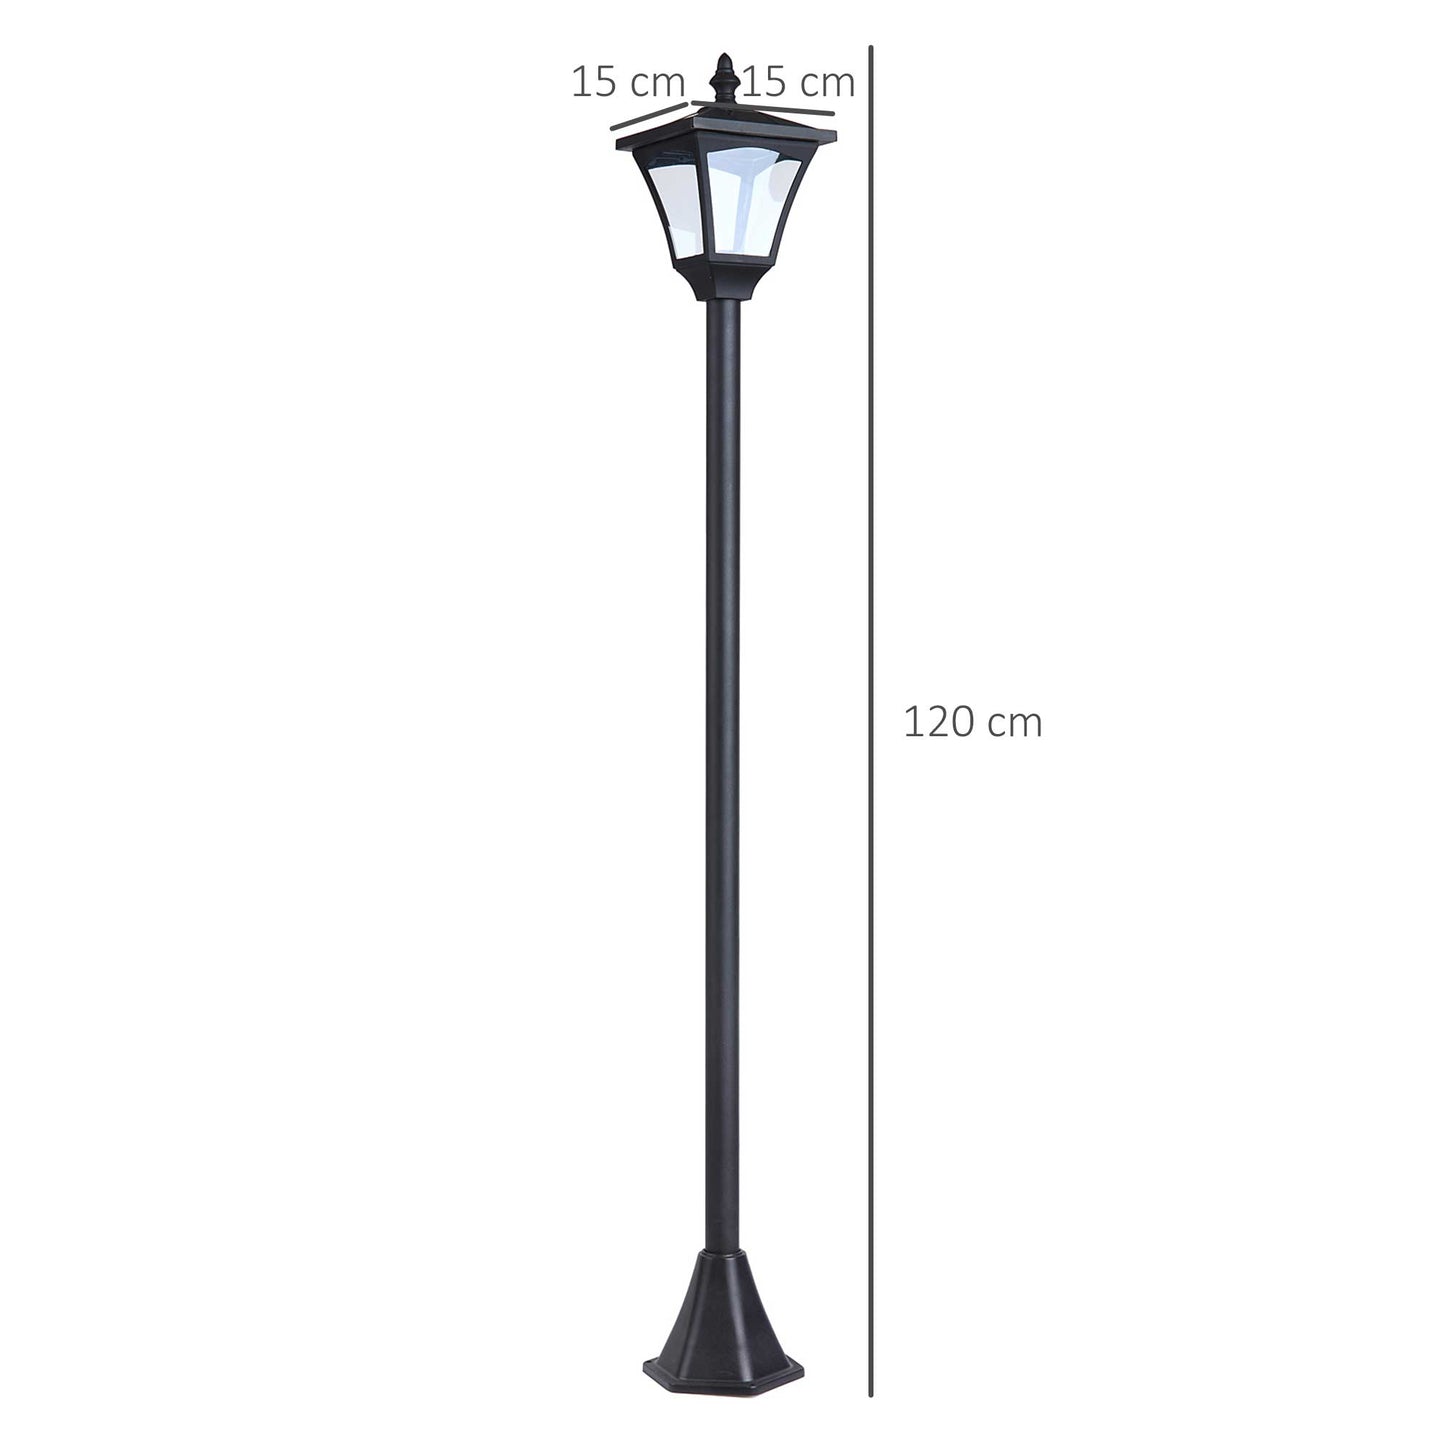 Outsunny Outdoor Solar Powered Post Lamp Sensor Dimmable LED Lantern Bollard Pathway 1.2M Tall – Black